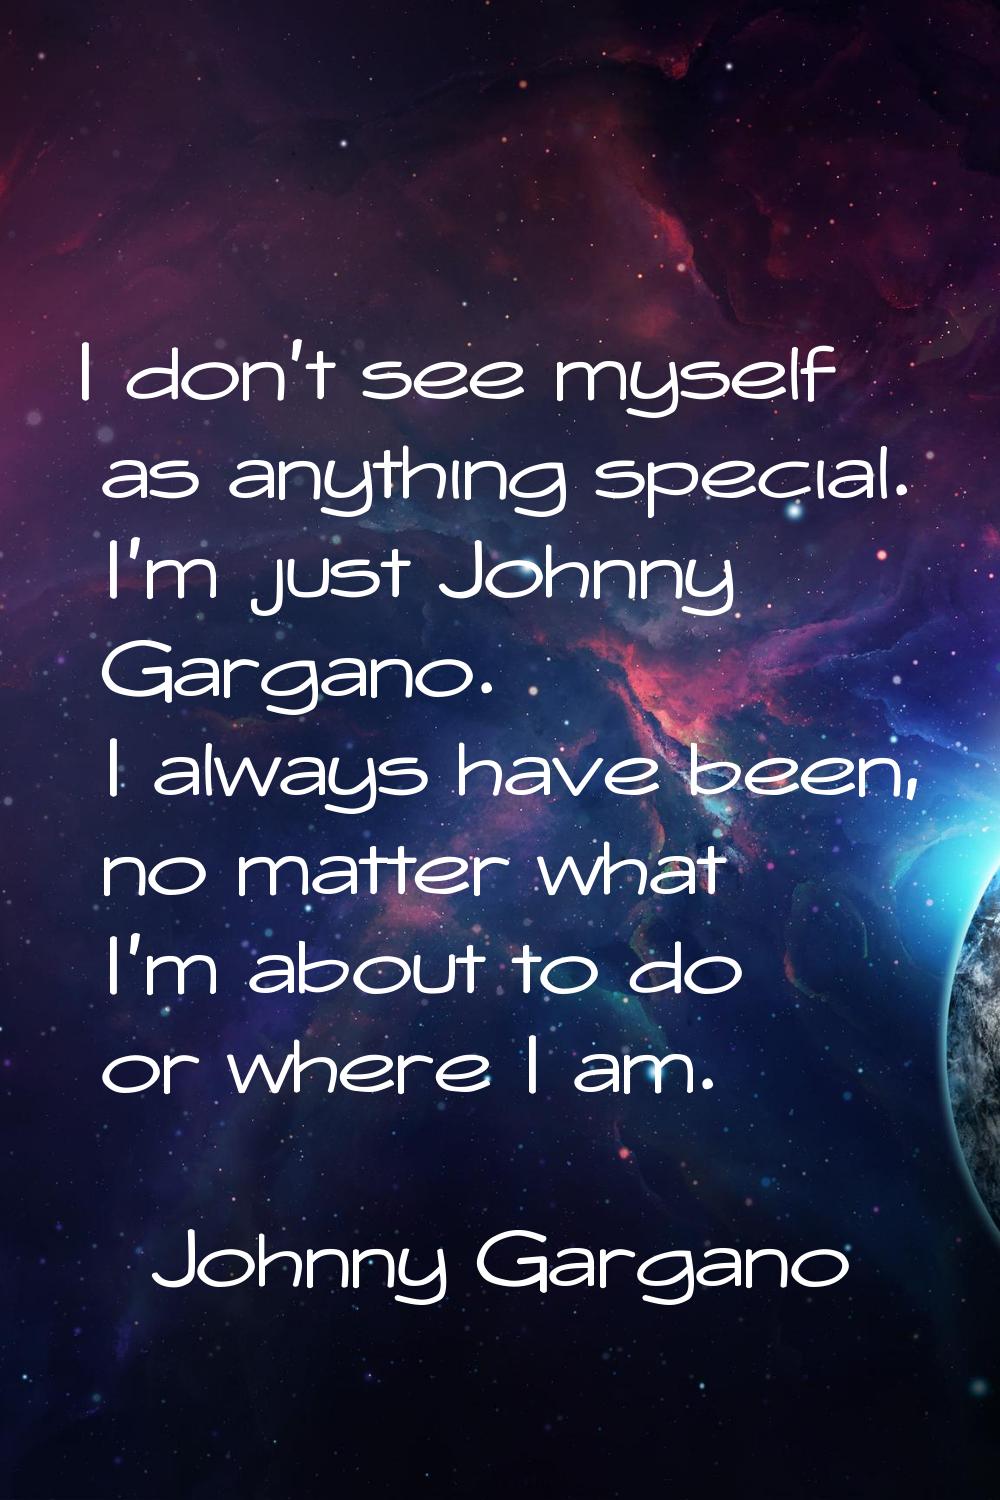 I don't see myself as anything special. I'm just Johnny Gargano. I always have been, no matter what